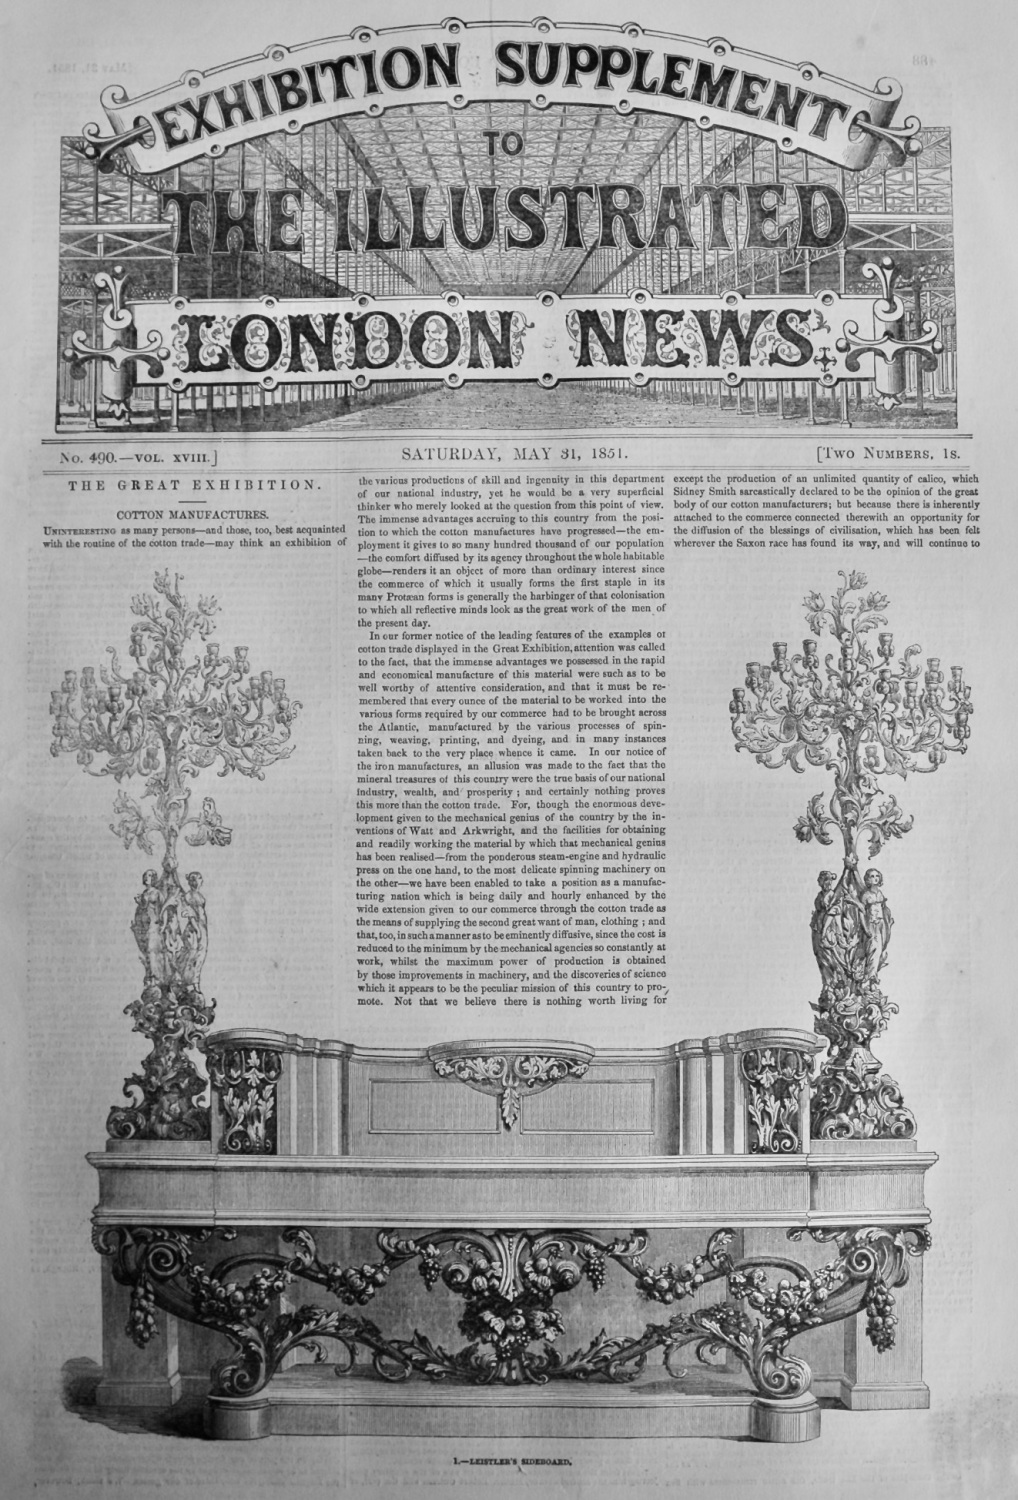 Great Exhibition Supplement to The Illustrated London News, May 31st, 1851.